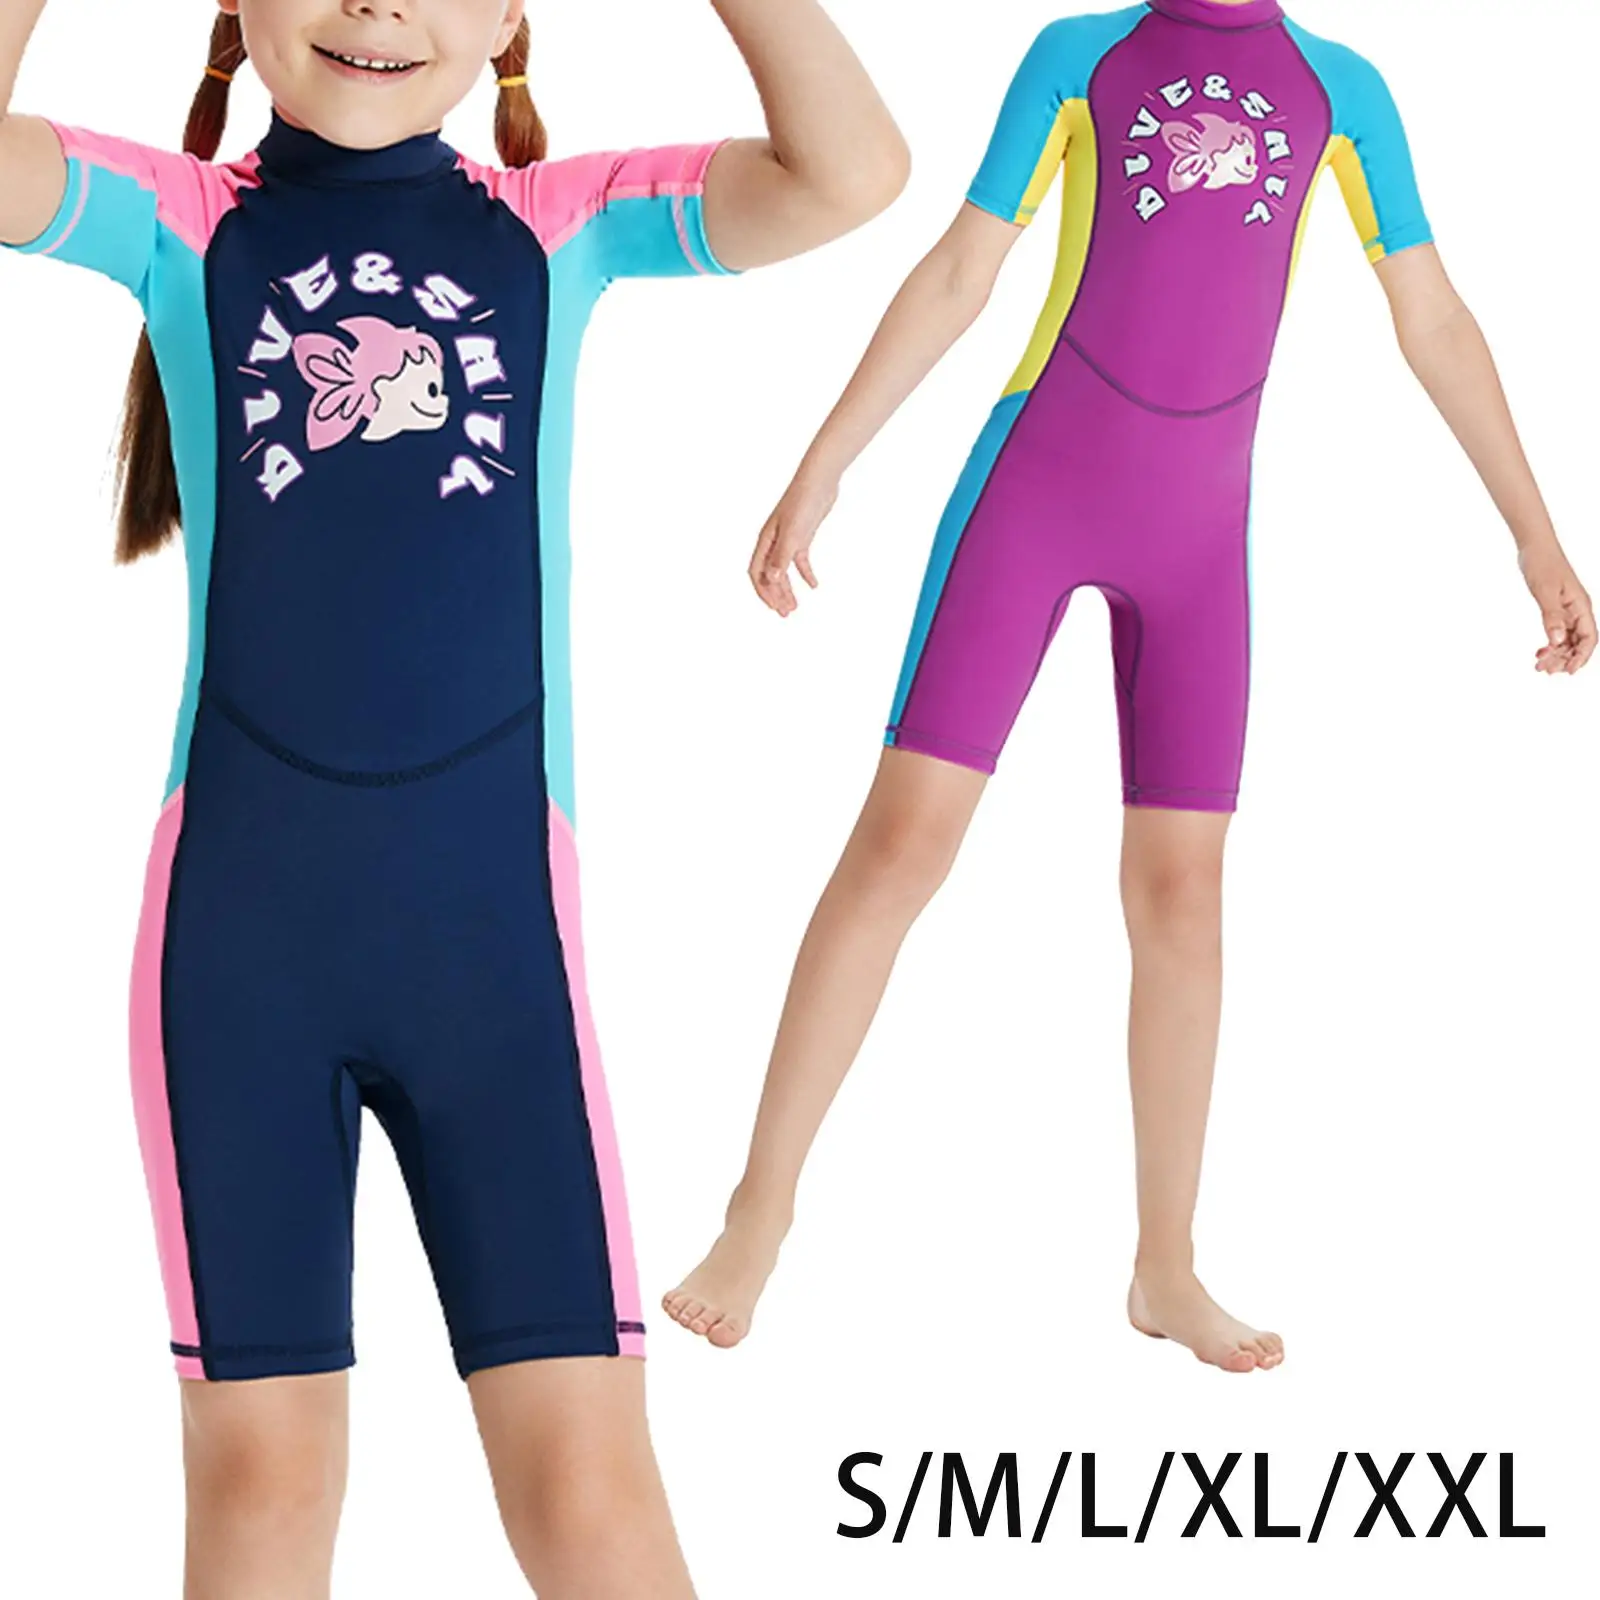 

Kids Diving Swimsuits Swimming Costume Short Sleeve Thermal Bathing Suit for Kayak Surfing Boating Water Sports Canoeing